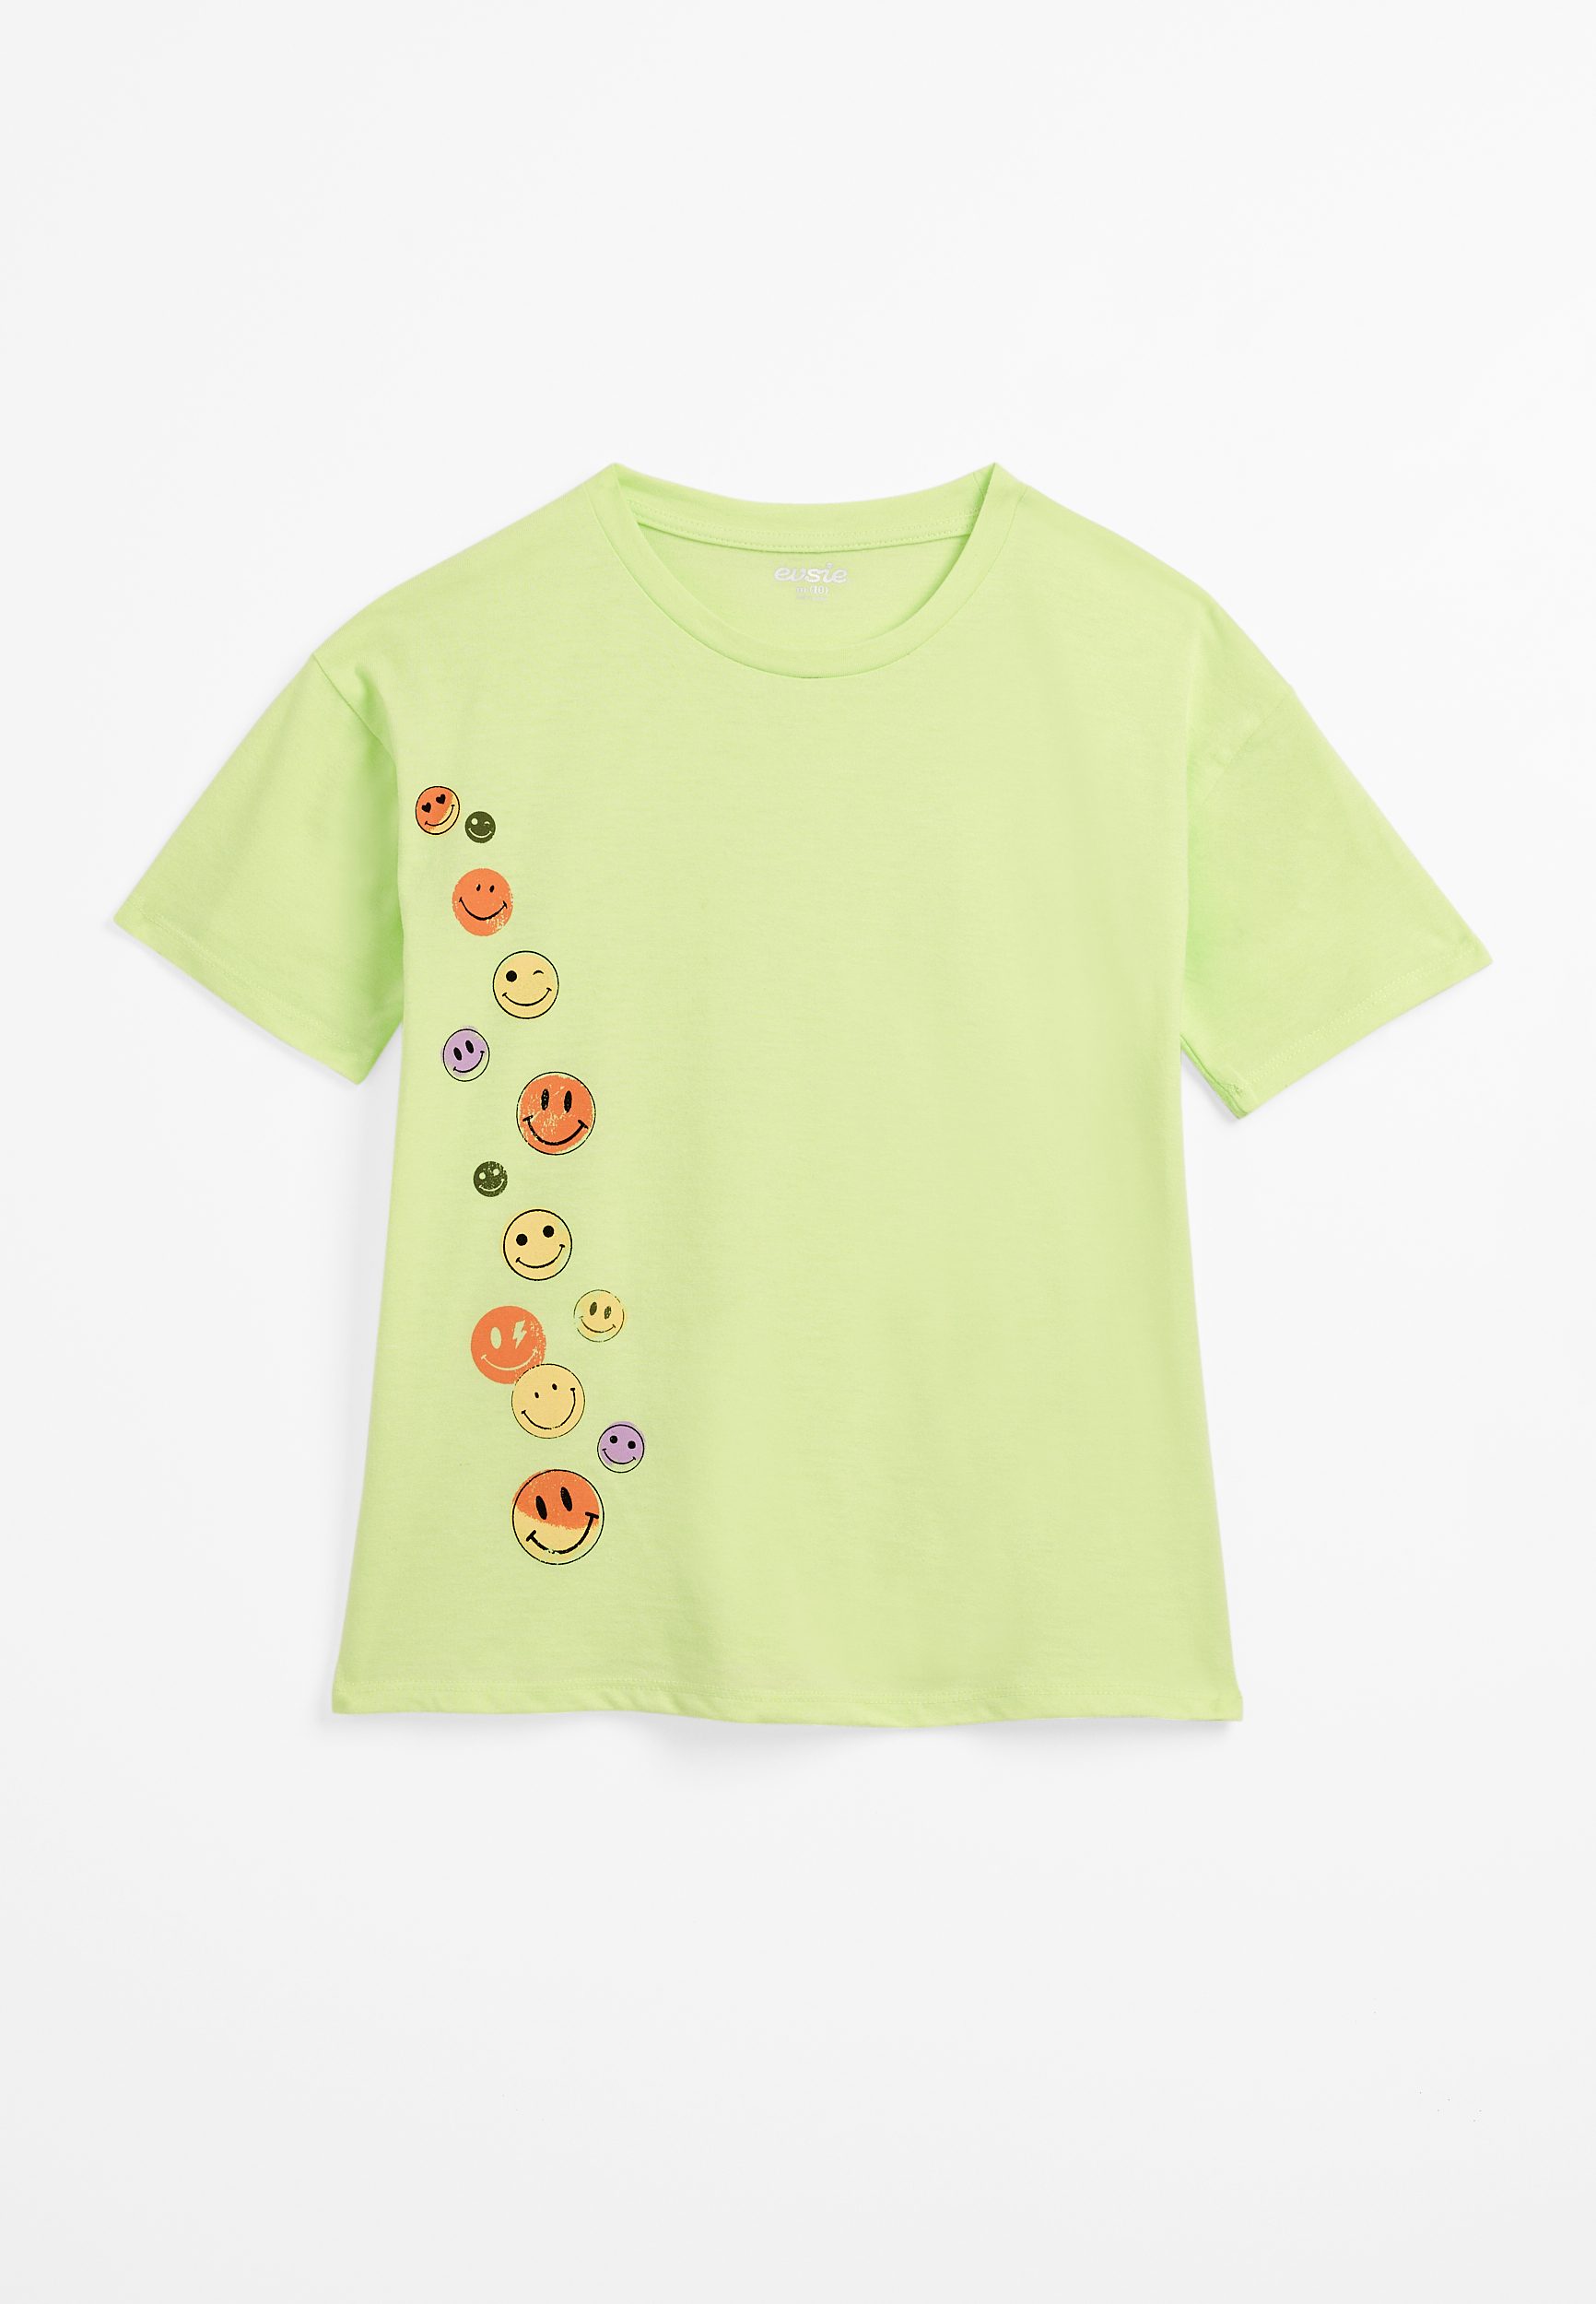 Girls Smiley Face Graphic Tee